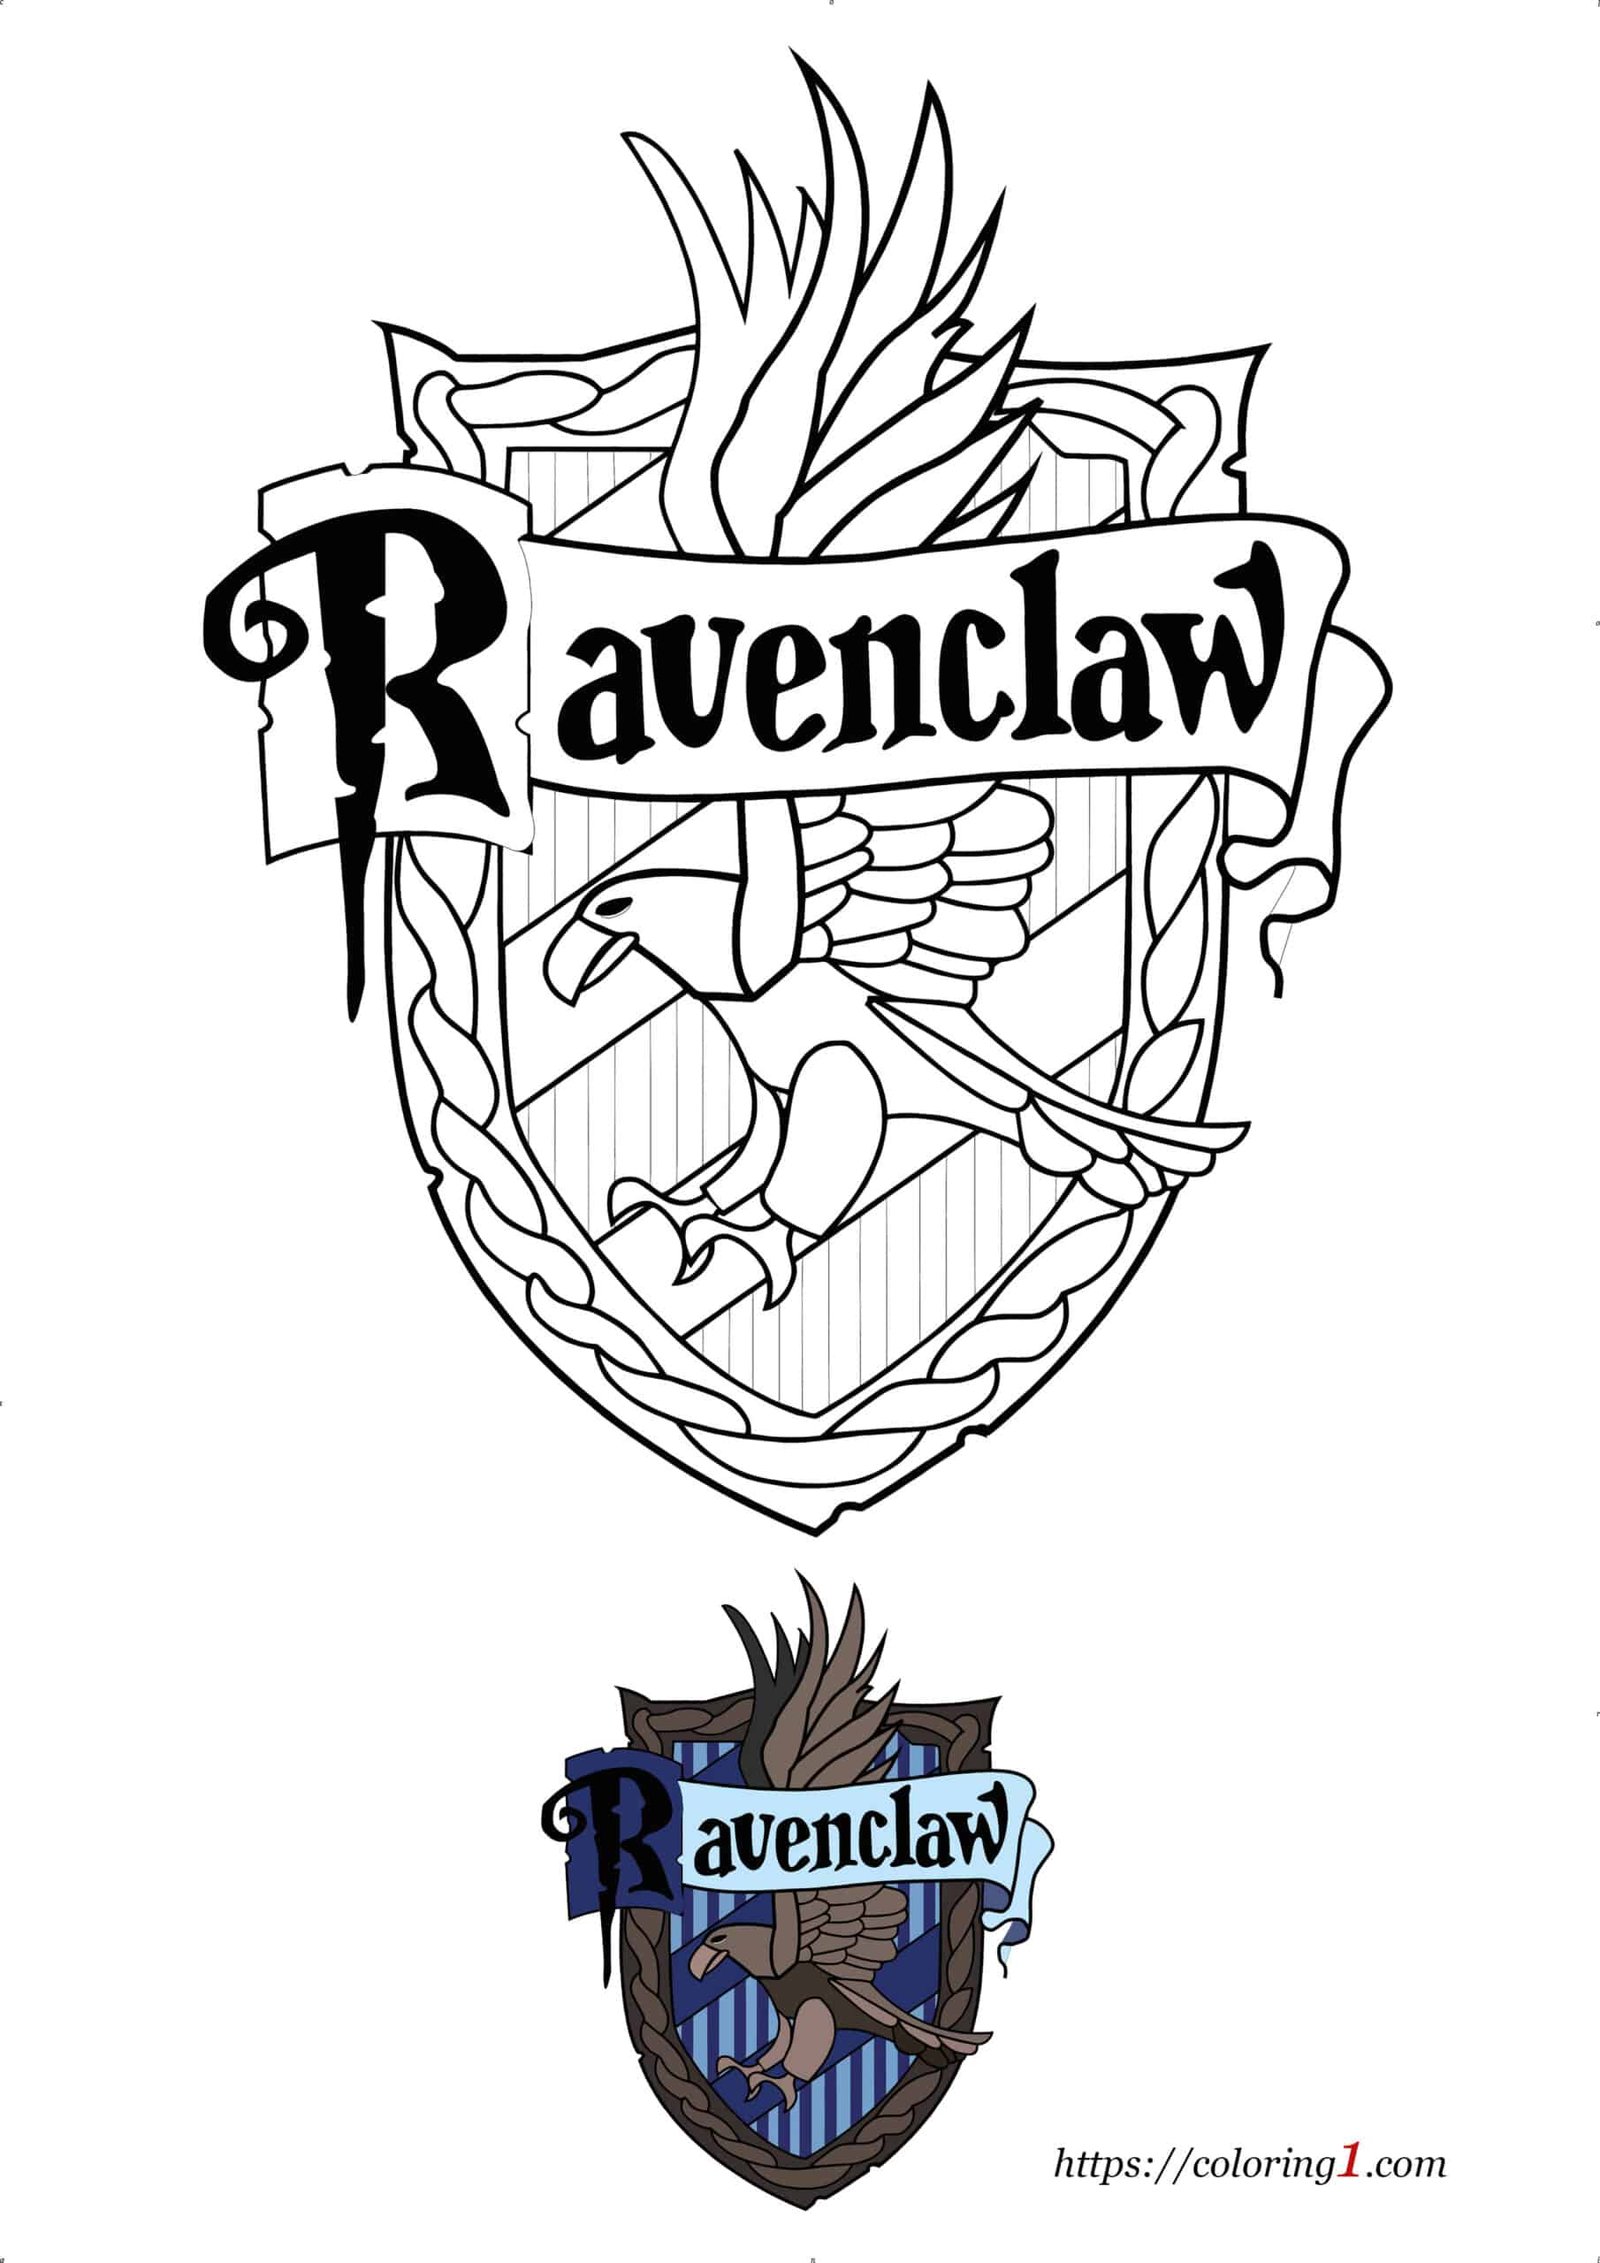 Harry Potter Ravenclaw coloring page to print pdf